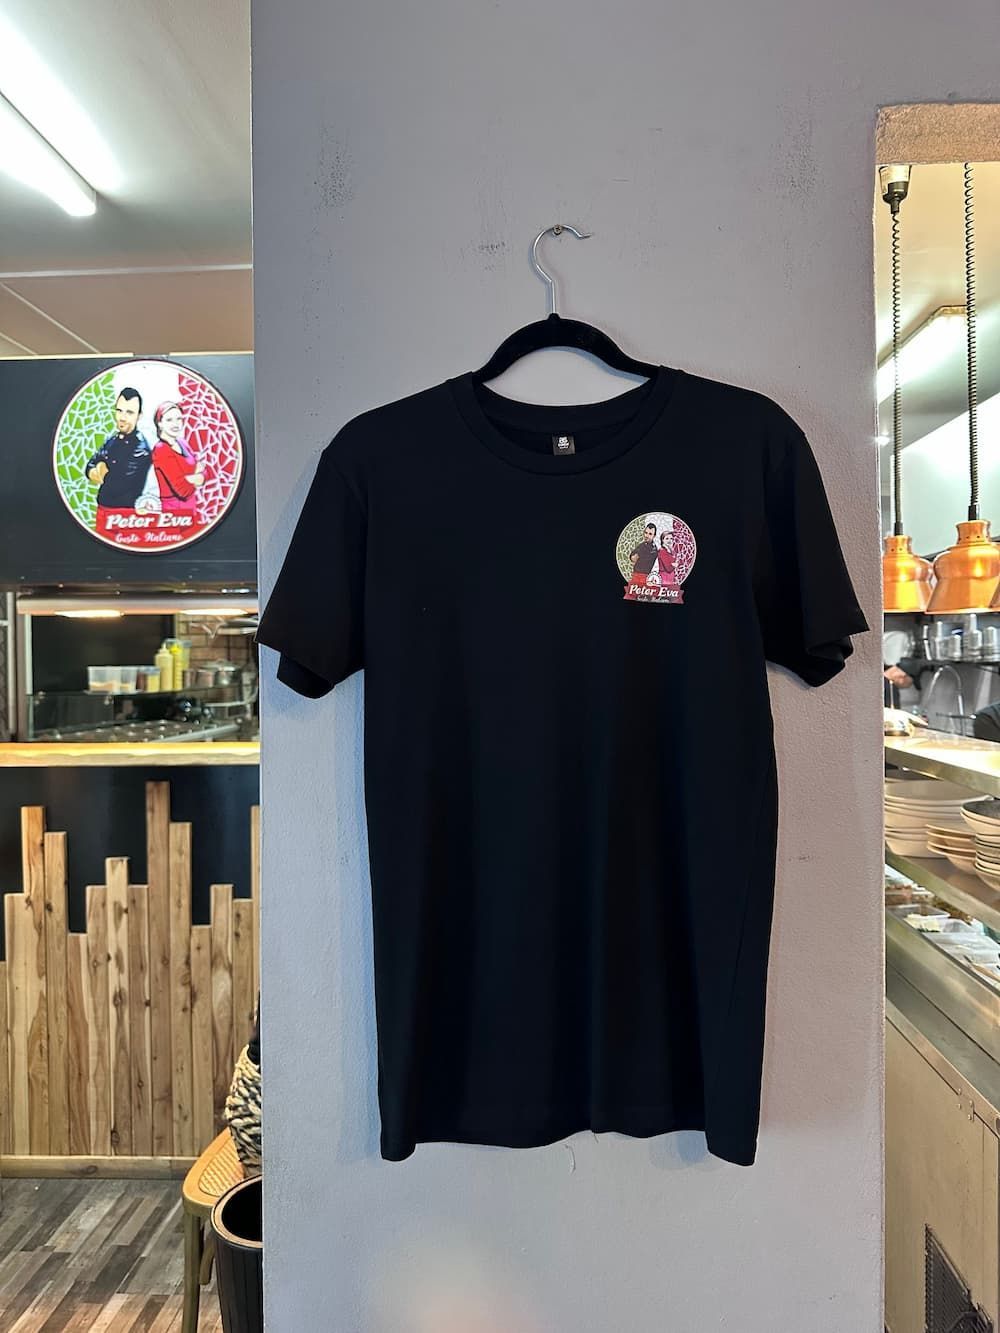 Tee Shirt Front — Pizza in Huskisson, NSW